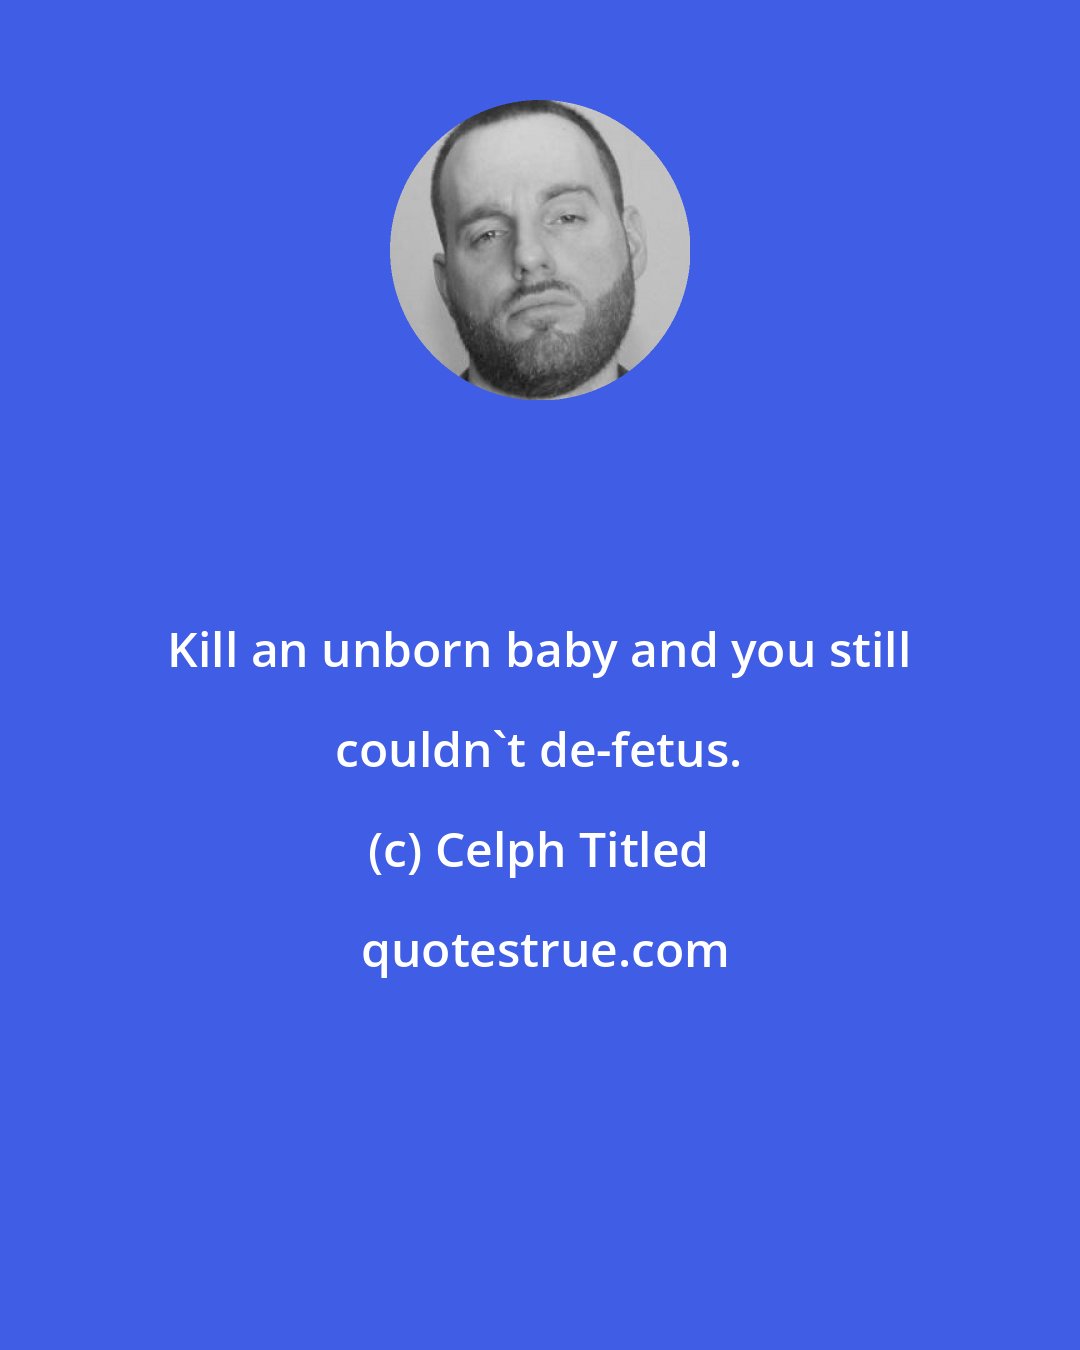 Celph Titled: Kill an unborn baby and you still couldn't de-fetus.